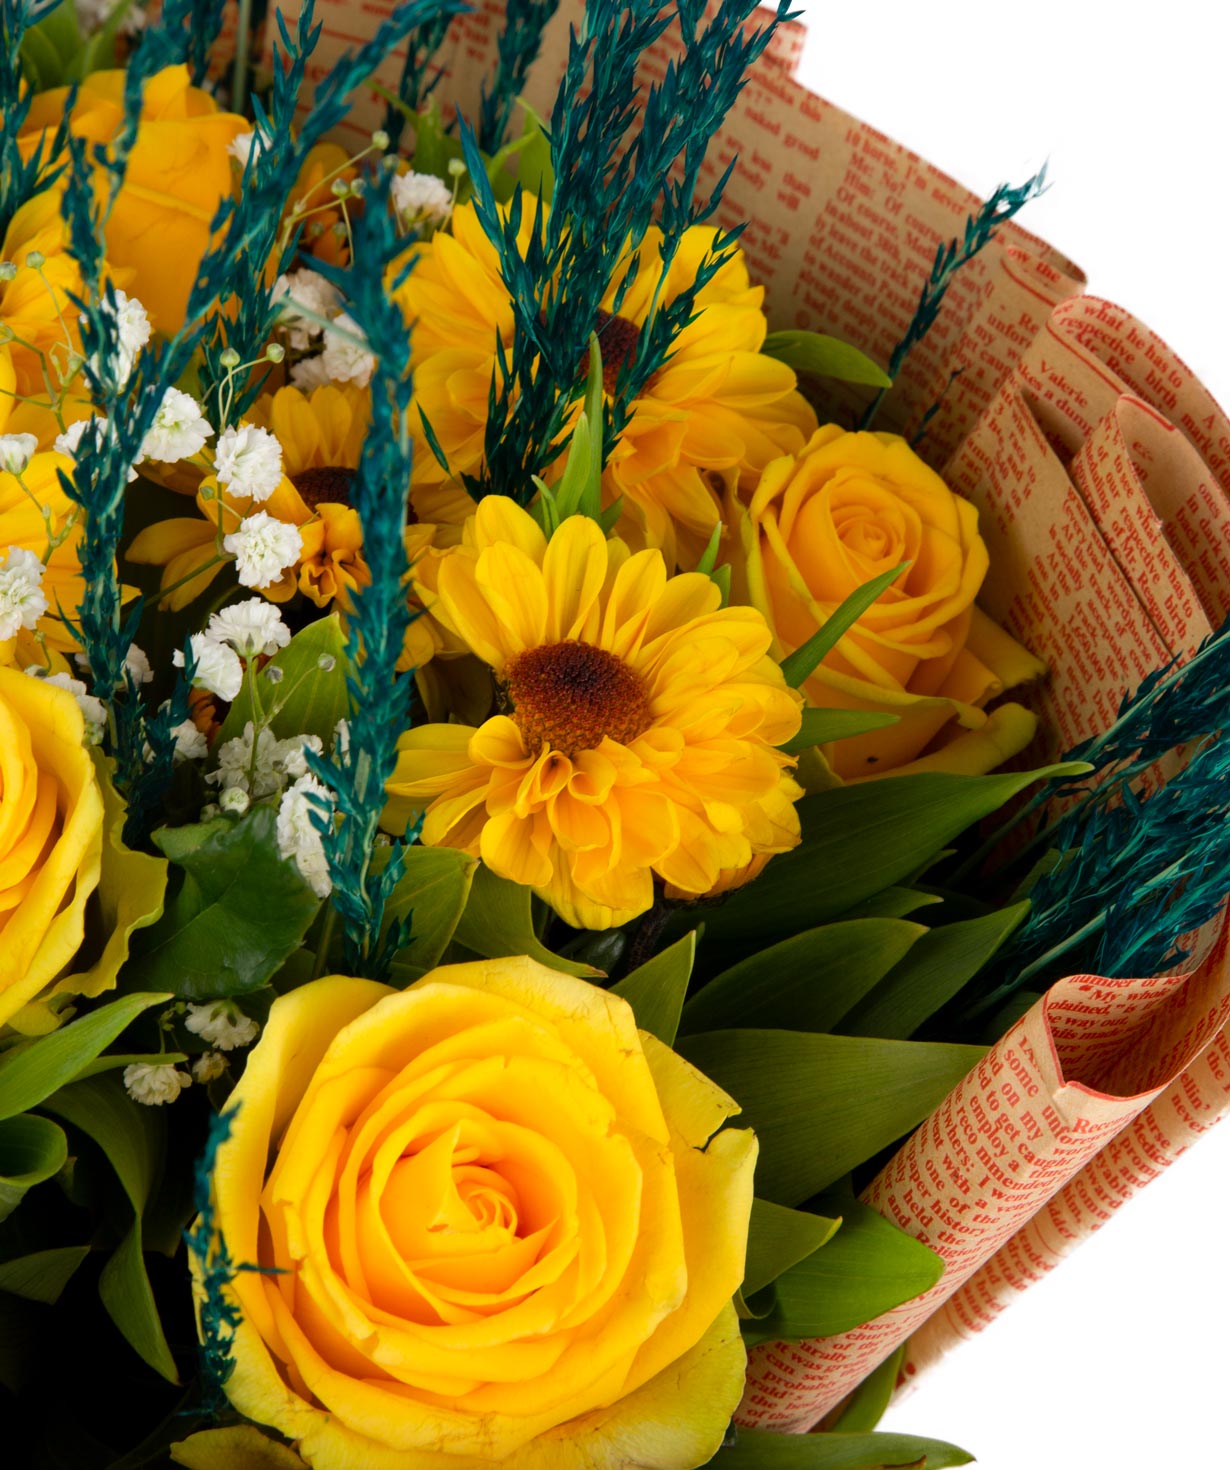 Bouquet `Maceio` with roses and chrysanthemums